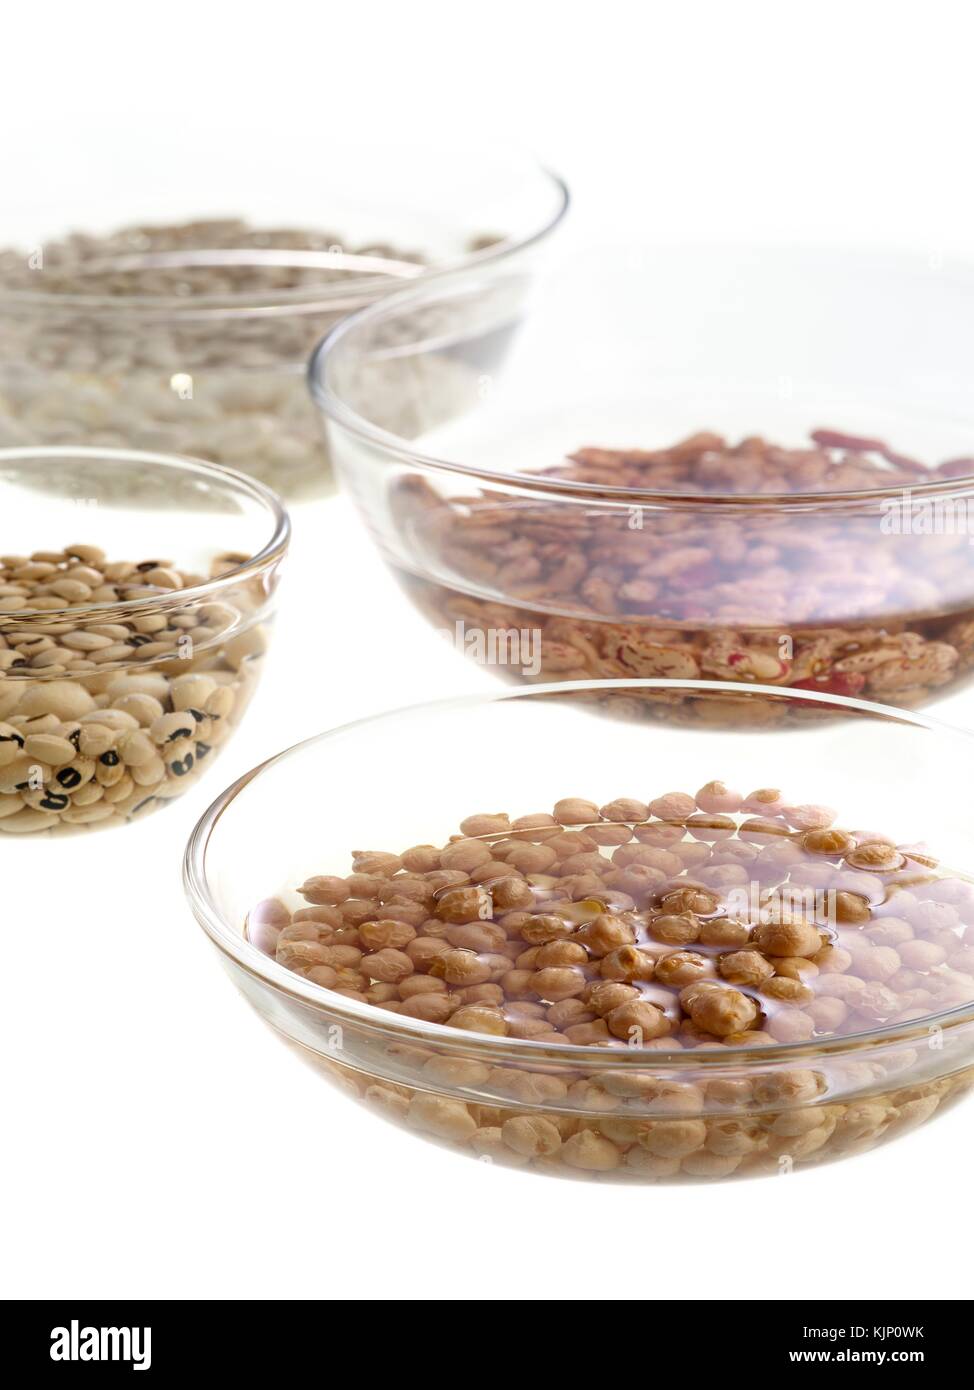 Sprouting pulses soaking in water. Stock Photo